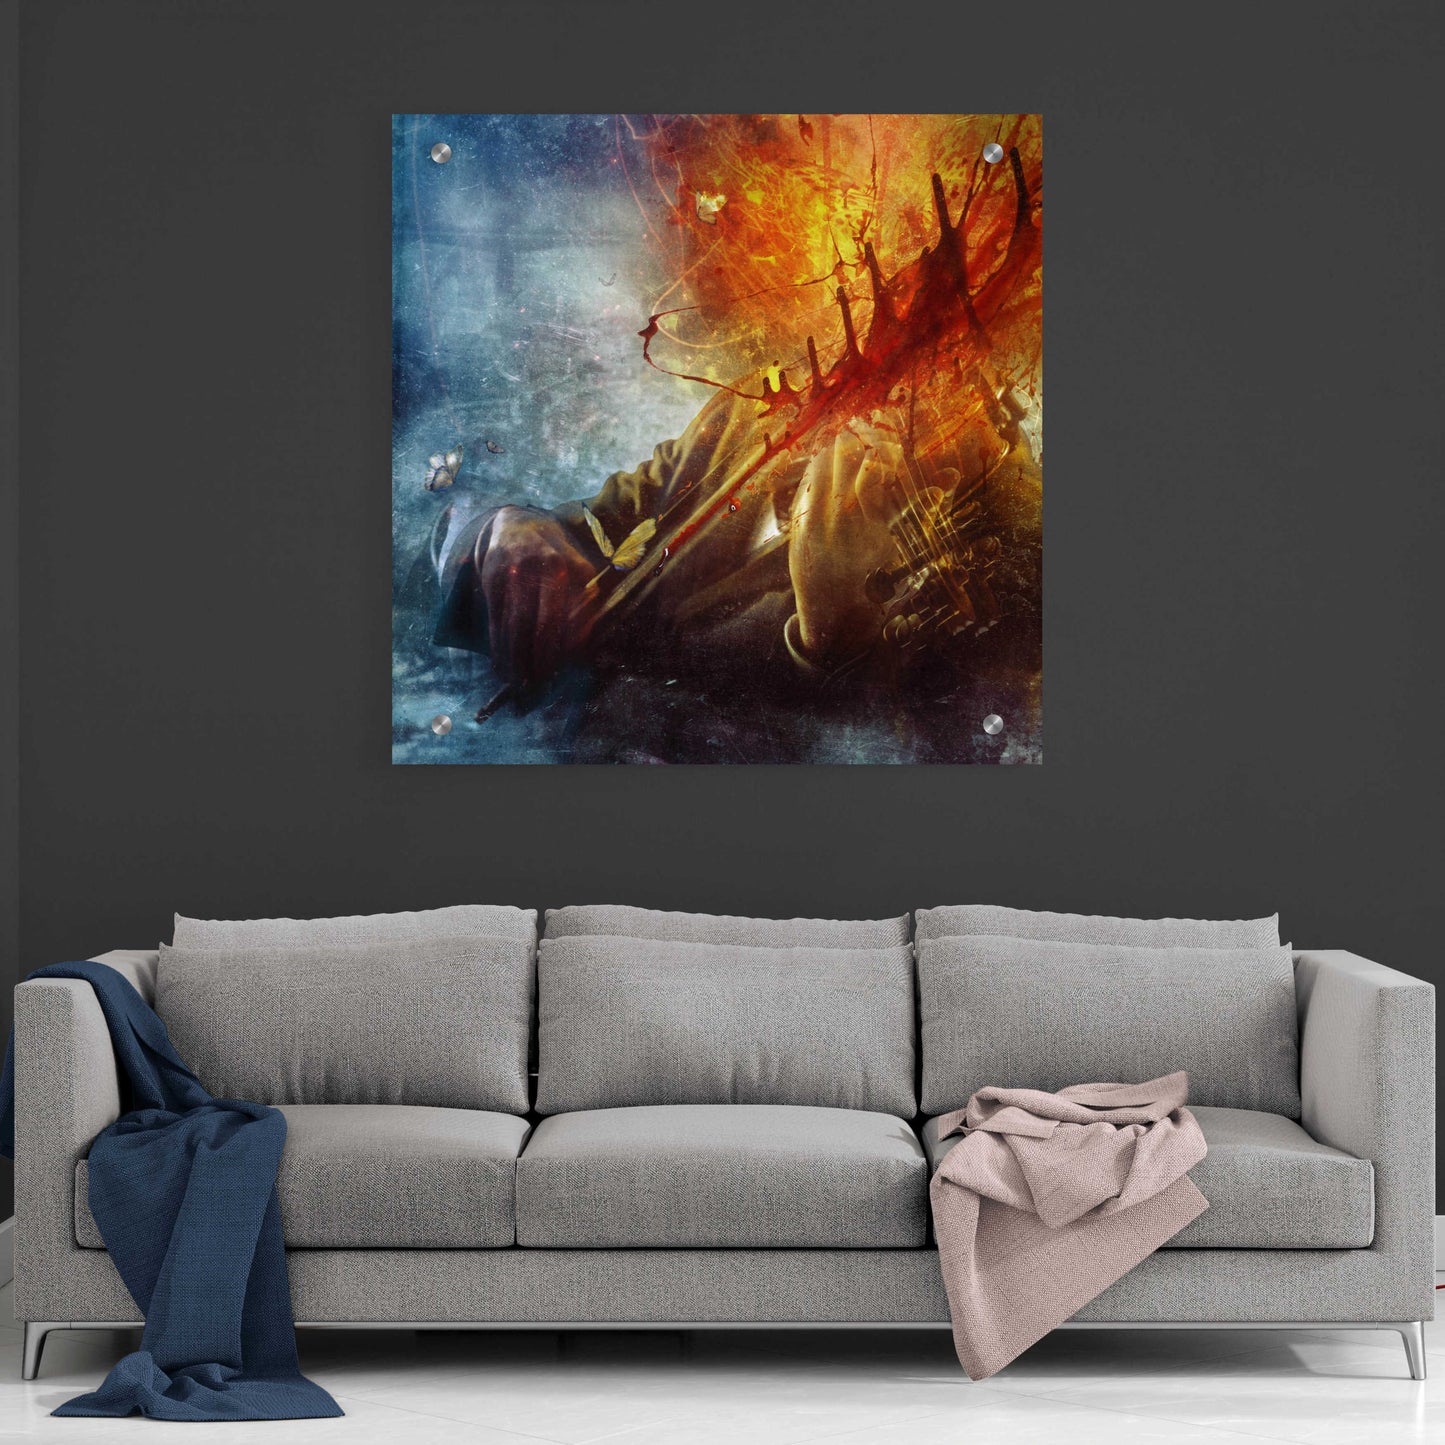 Epic Art 'A Look Into The Abyss' by Mario Sanchez Nevado, Acrylic Glass Wall Art,36x36